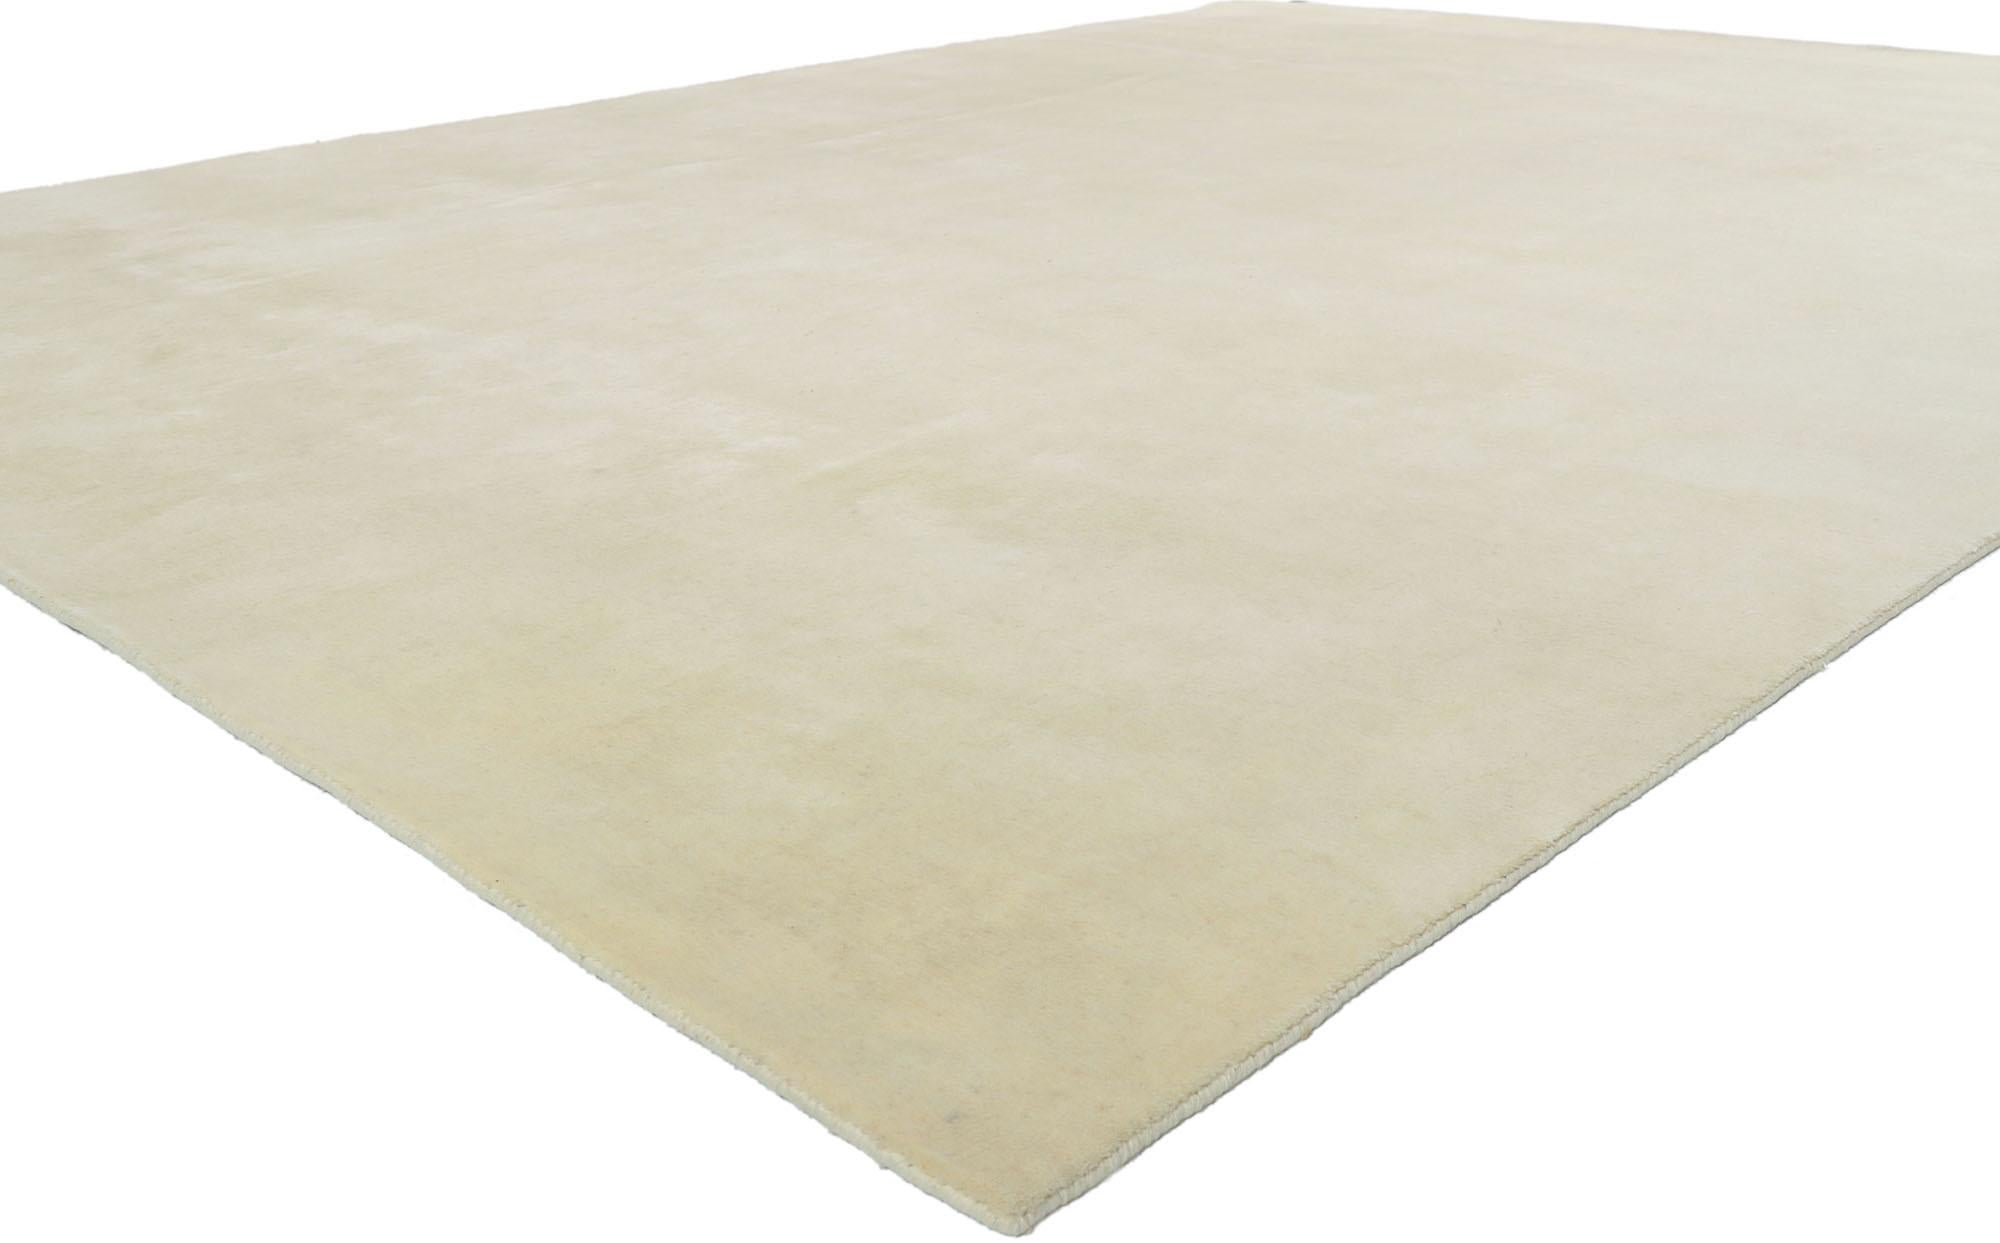 30754 New Contemporary Ivory Area Rug with Minimalist Style, 09'00 x 12'00. Drenched in the enthralling world of contemporary allure and nuanced minimalism, this flawlessly crafted wool rug unfurls from the skilled looms of modern India. Its essence